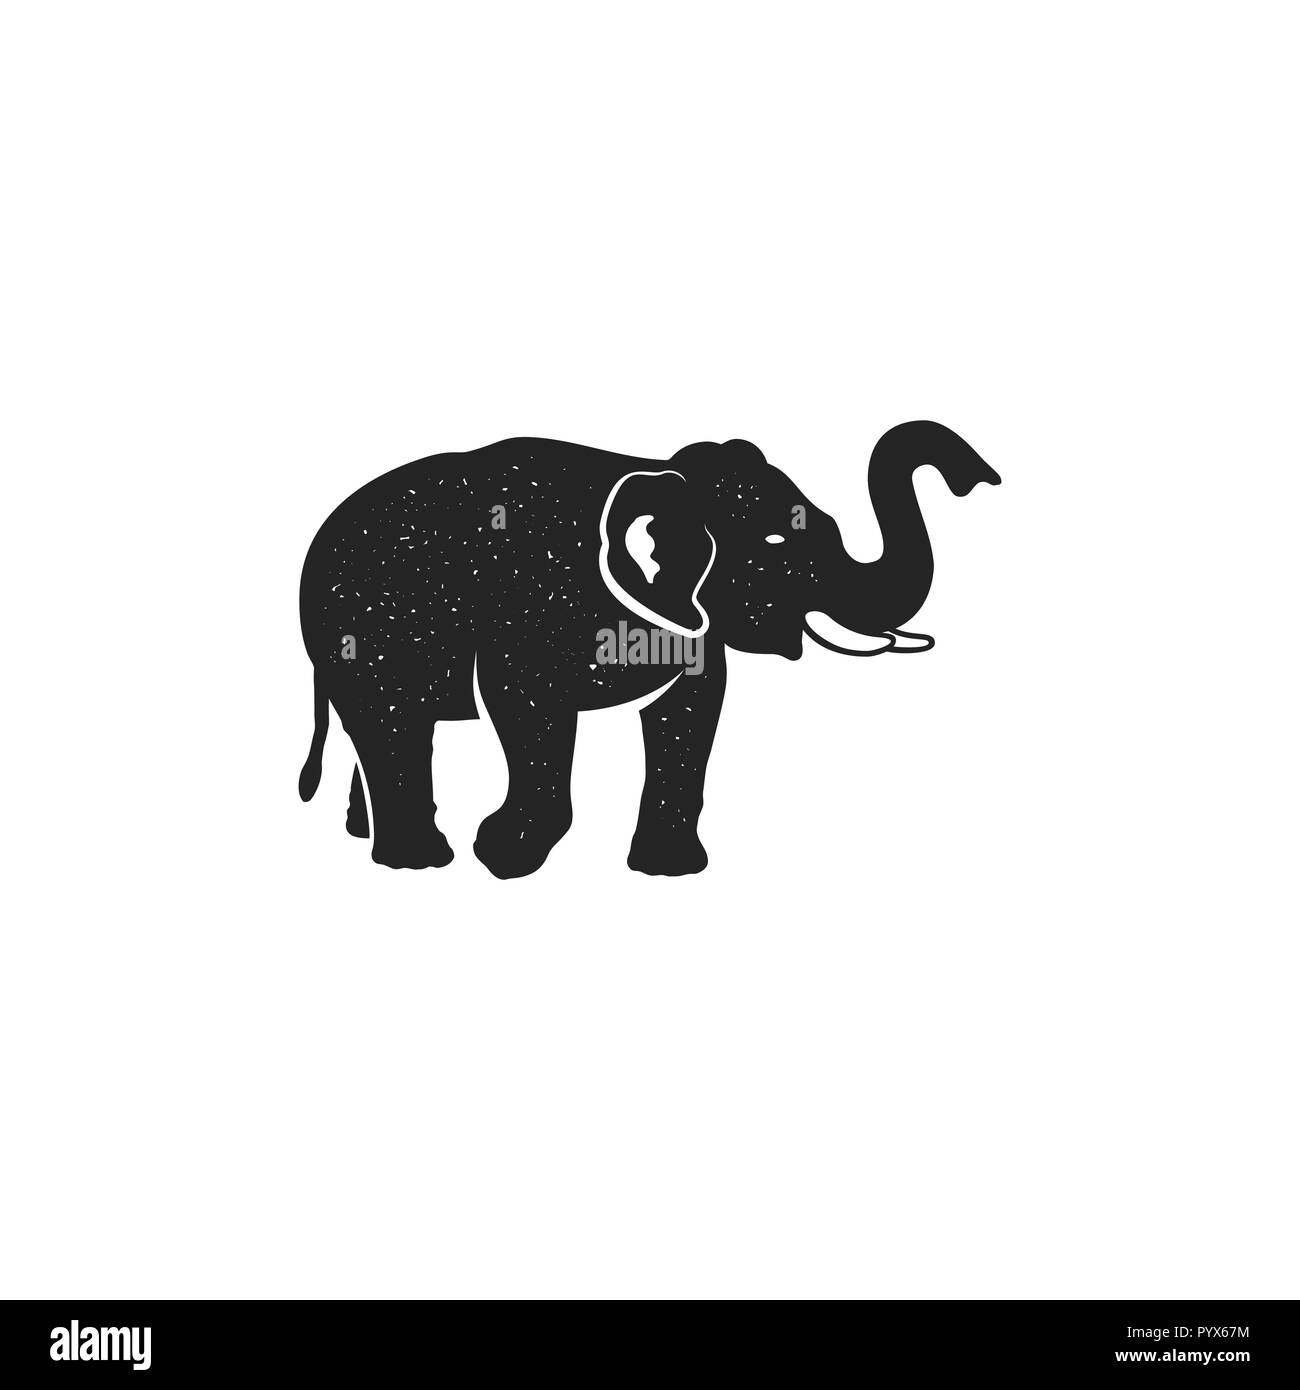 Elephant icon. Vintage hand drawn wild animal symbol. Monochrome retro design, style. With distressed effect. Stock vector pictogram isolated on white background Stock Vector